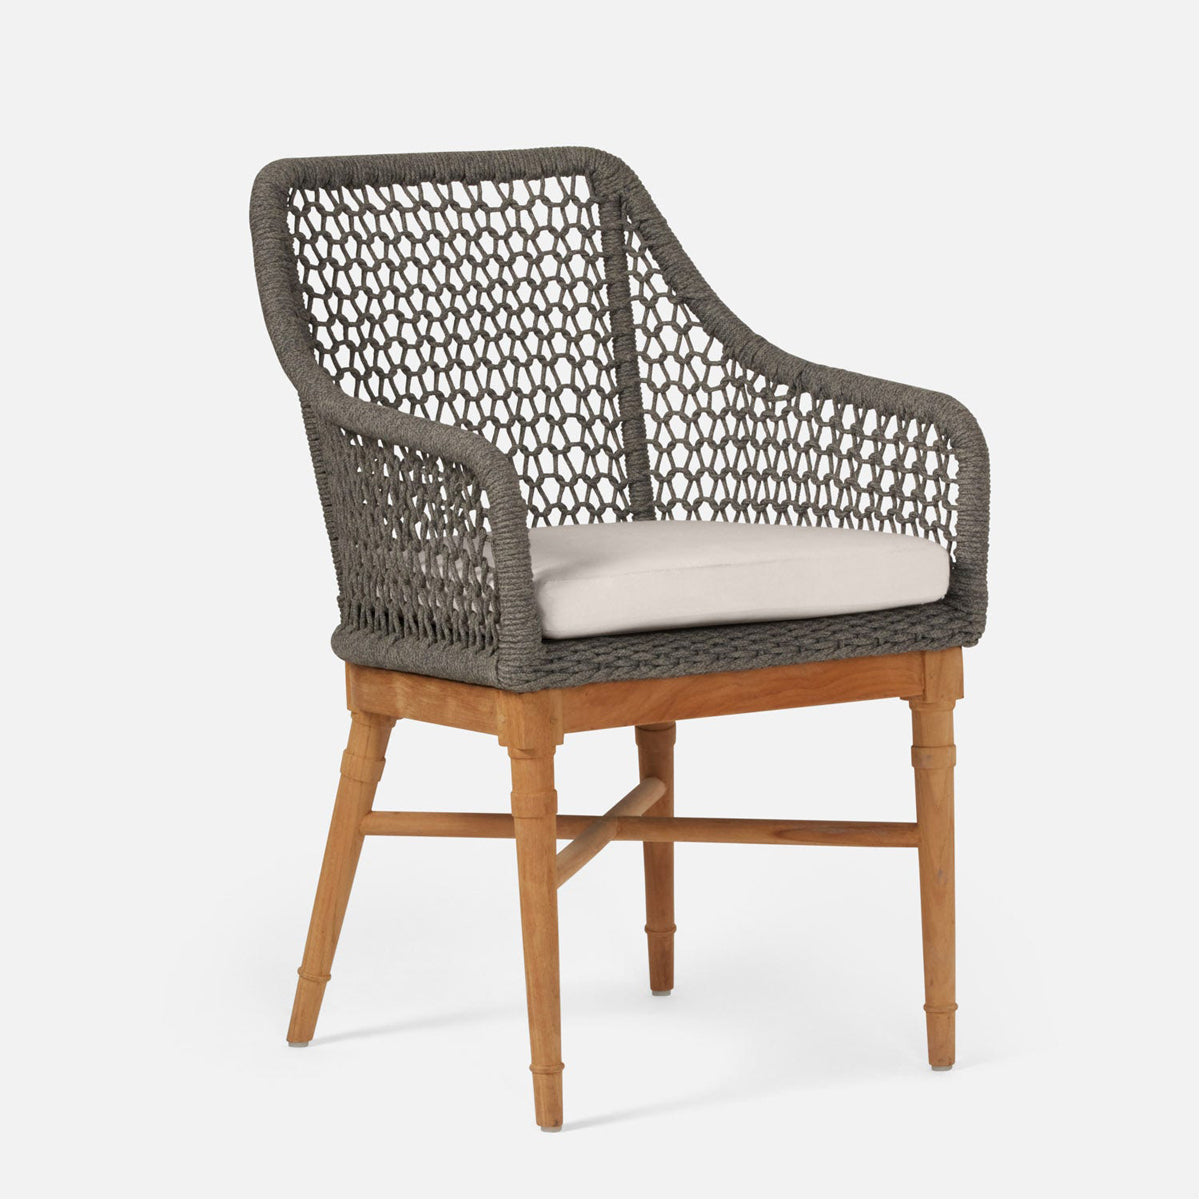 Made Goods Chadwick Woven Rope Outdoor Arm Chair in Weser Fabric